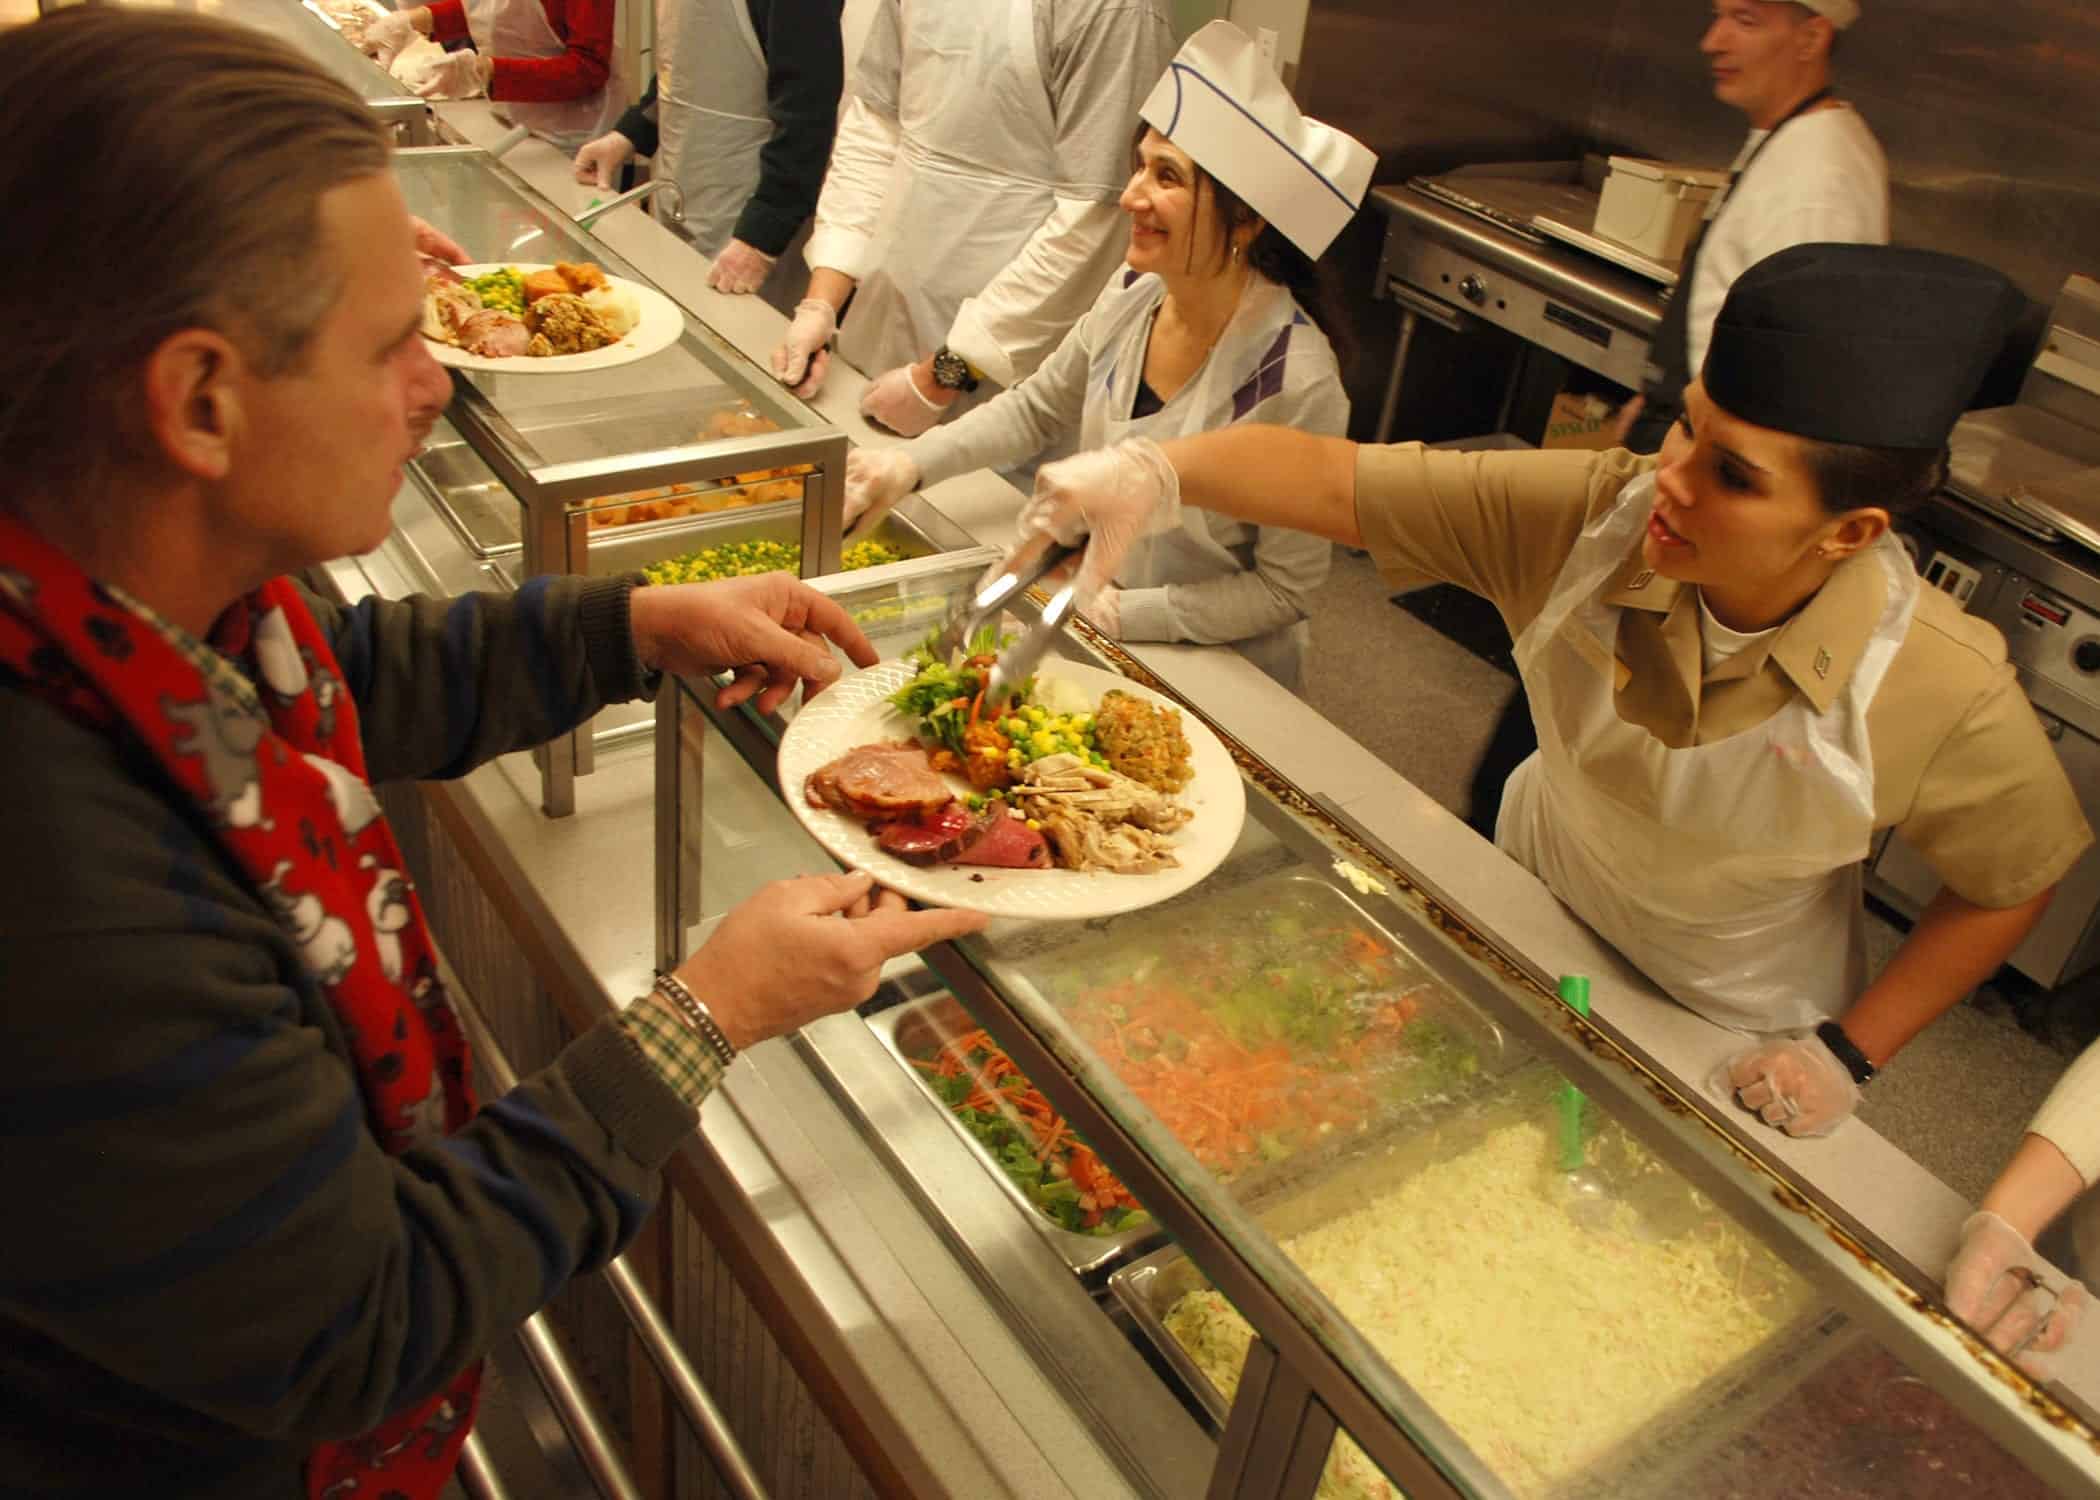 101225-N-7642M-082 BOSTON (Dec. 25, 2010) Gunner's Mate Seaman Kali Morris, assigned to USS Constitution, serves Christmas dinner at the New England Center for Homeless Veterans. Constitution Sailors have volunteered 1,113 man-hours to the center since establishing a partnership in April. (U.S. Navy photo by Mass Communication Specialist 3rd Class Kathryn E. Macdonald/Released)